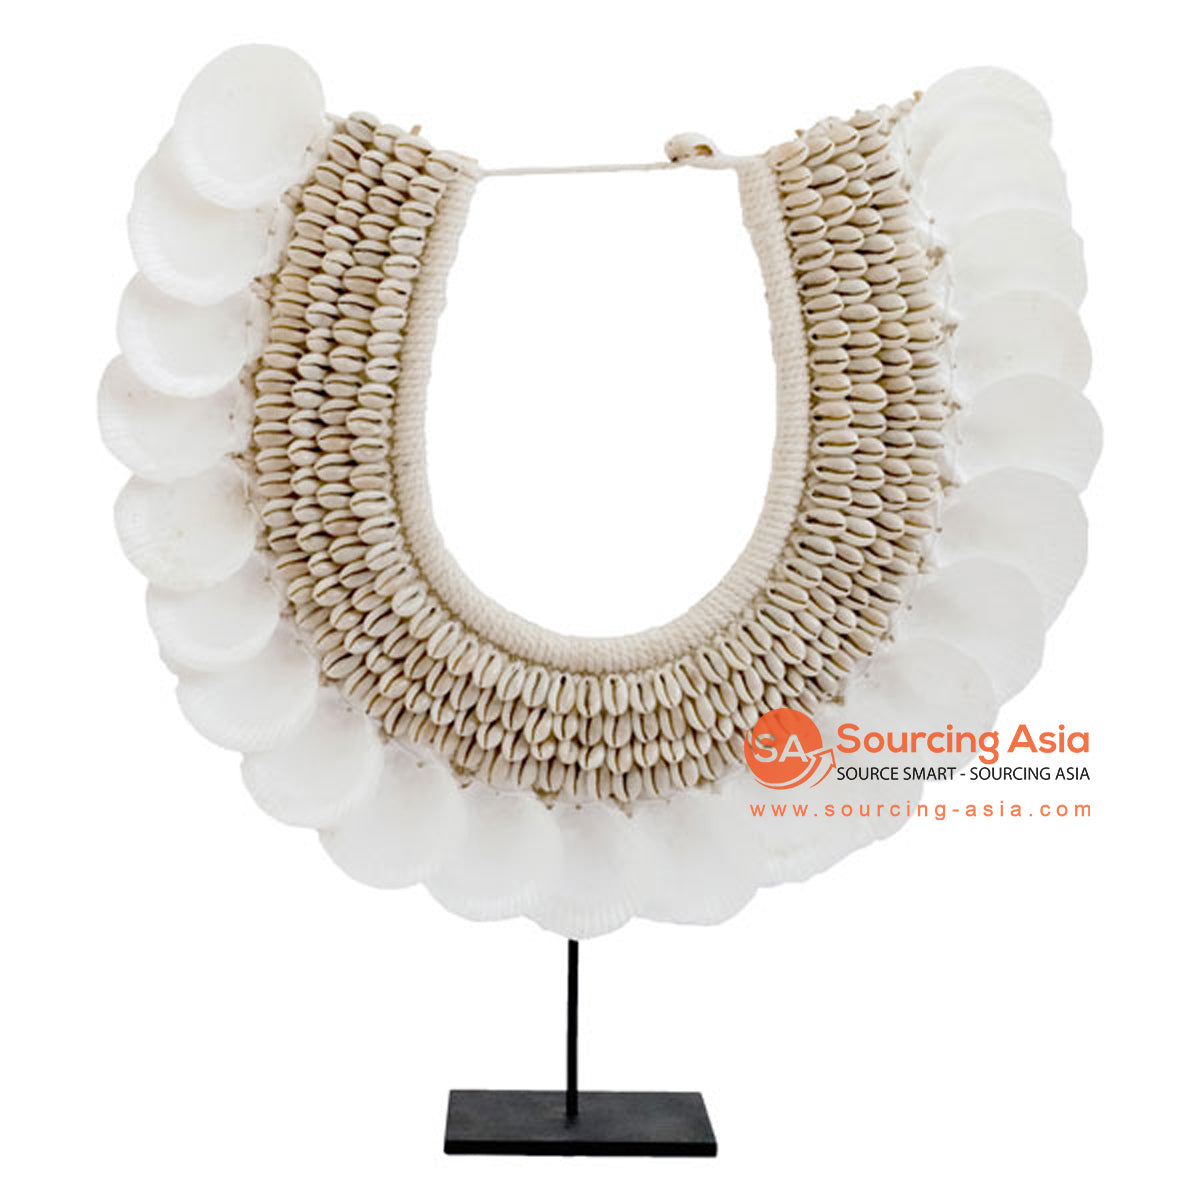 SHL169-1 NATURAL SHELL NECKLACE ON STAND DECORATION